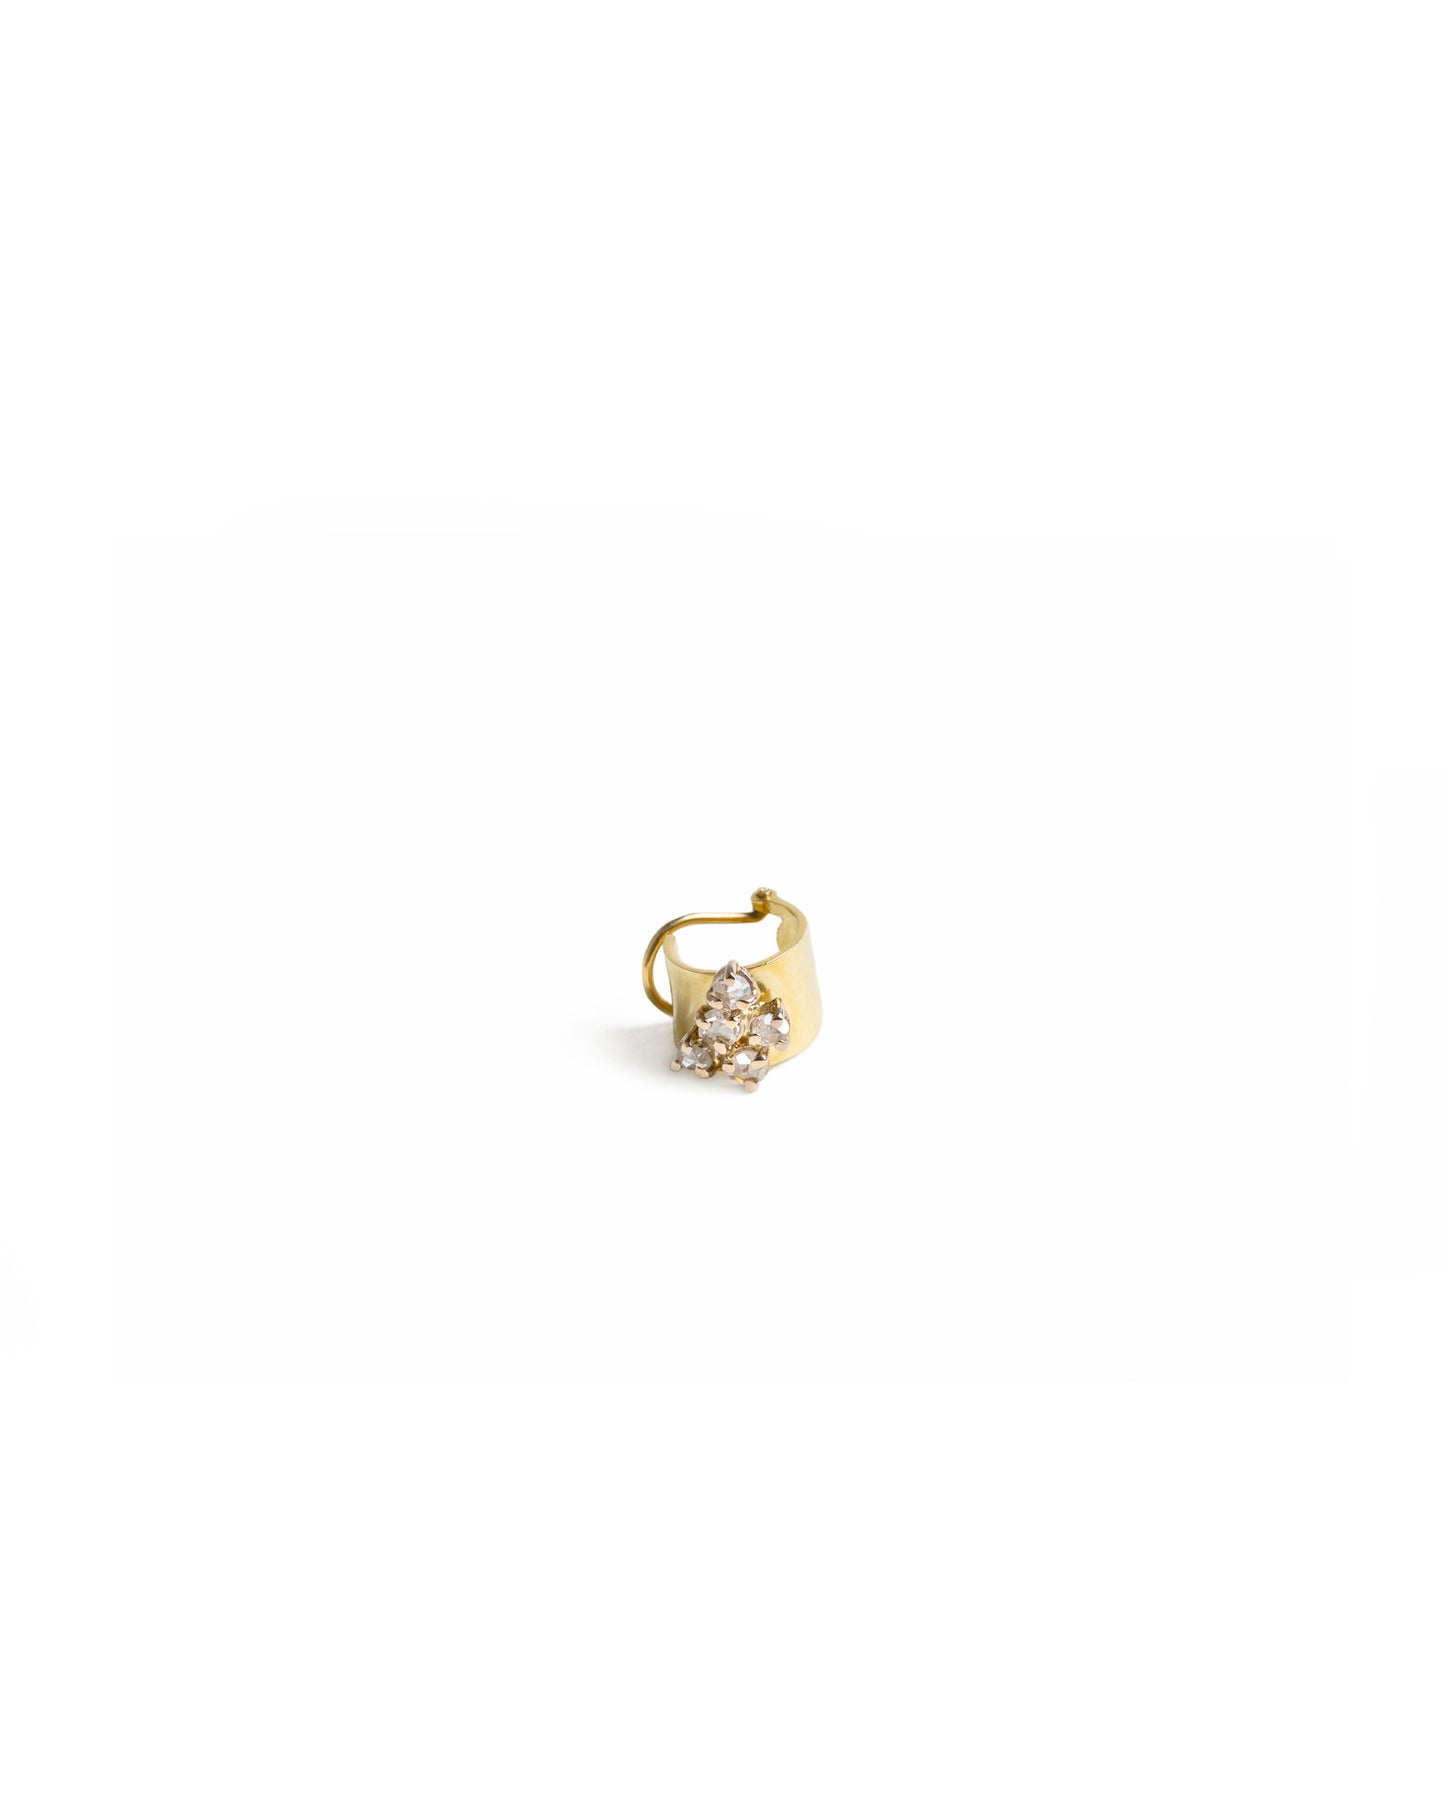 EAR CUFF IN FAIRMINED GOLD WITH CLUSTER OF 5 DIAMONDS